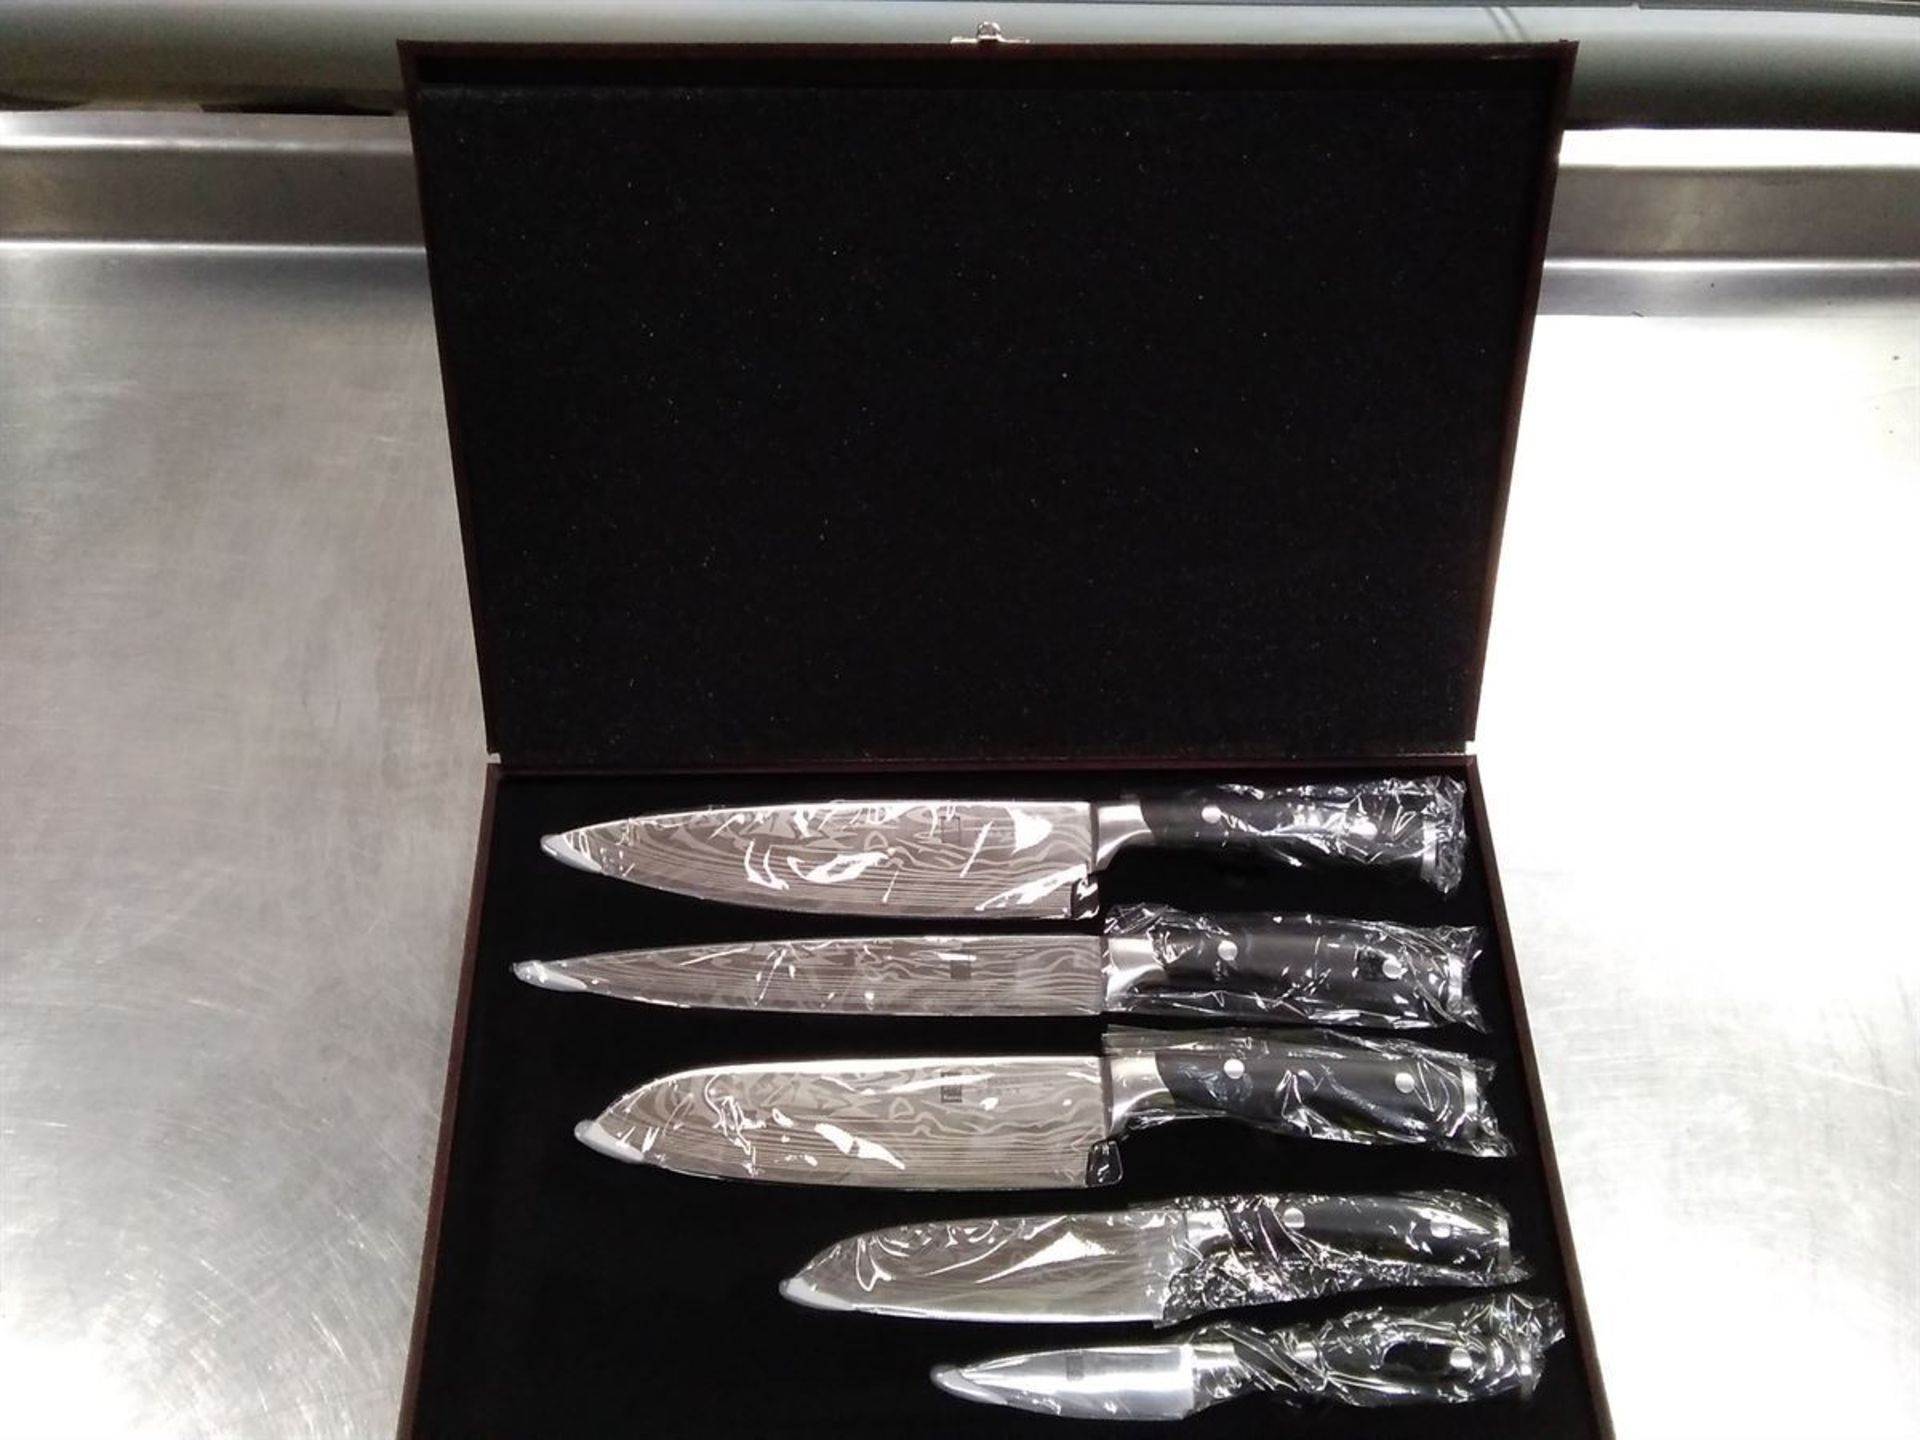 Kyoto Damascus 5pcs Knife Set in Wooden Case - Image 2 of 4